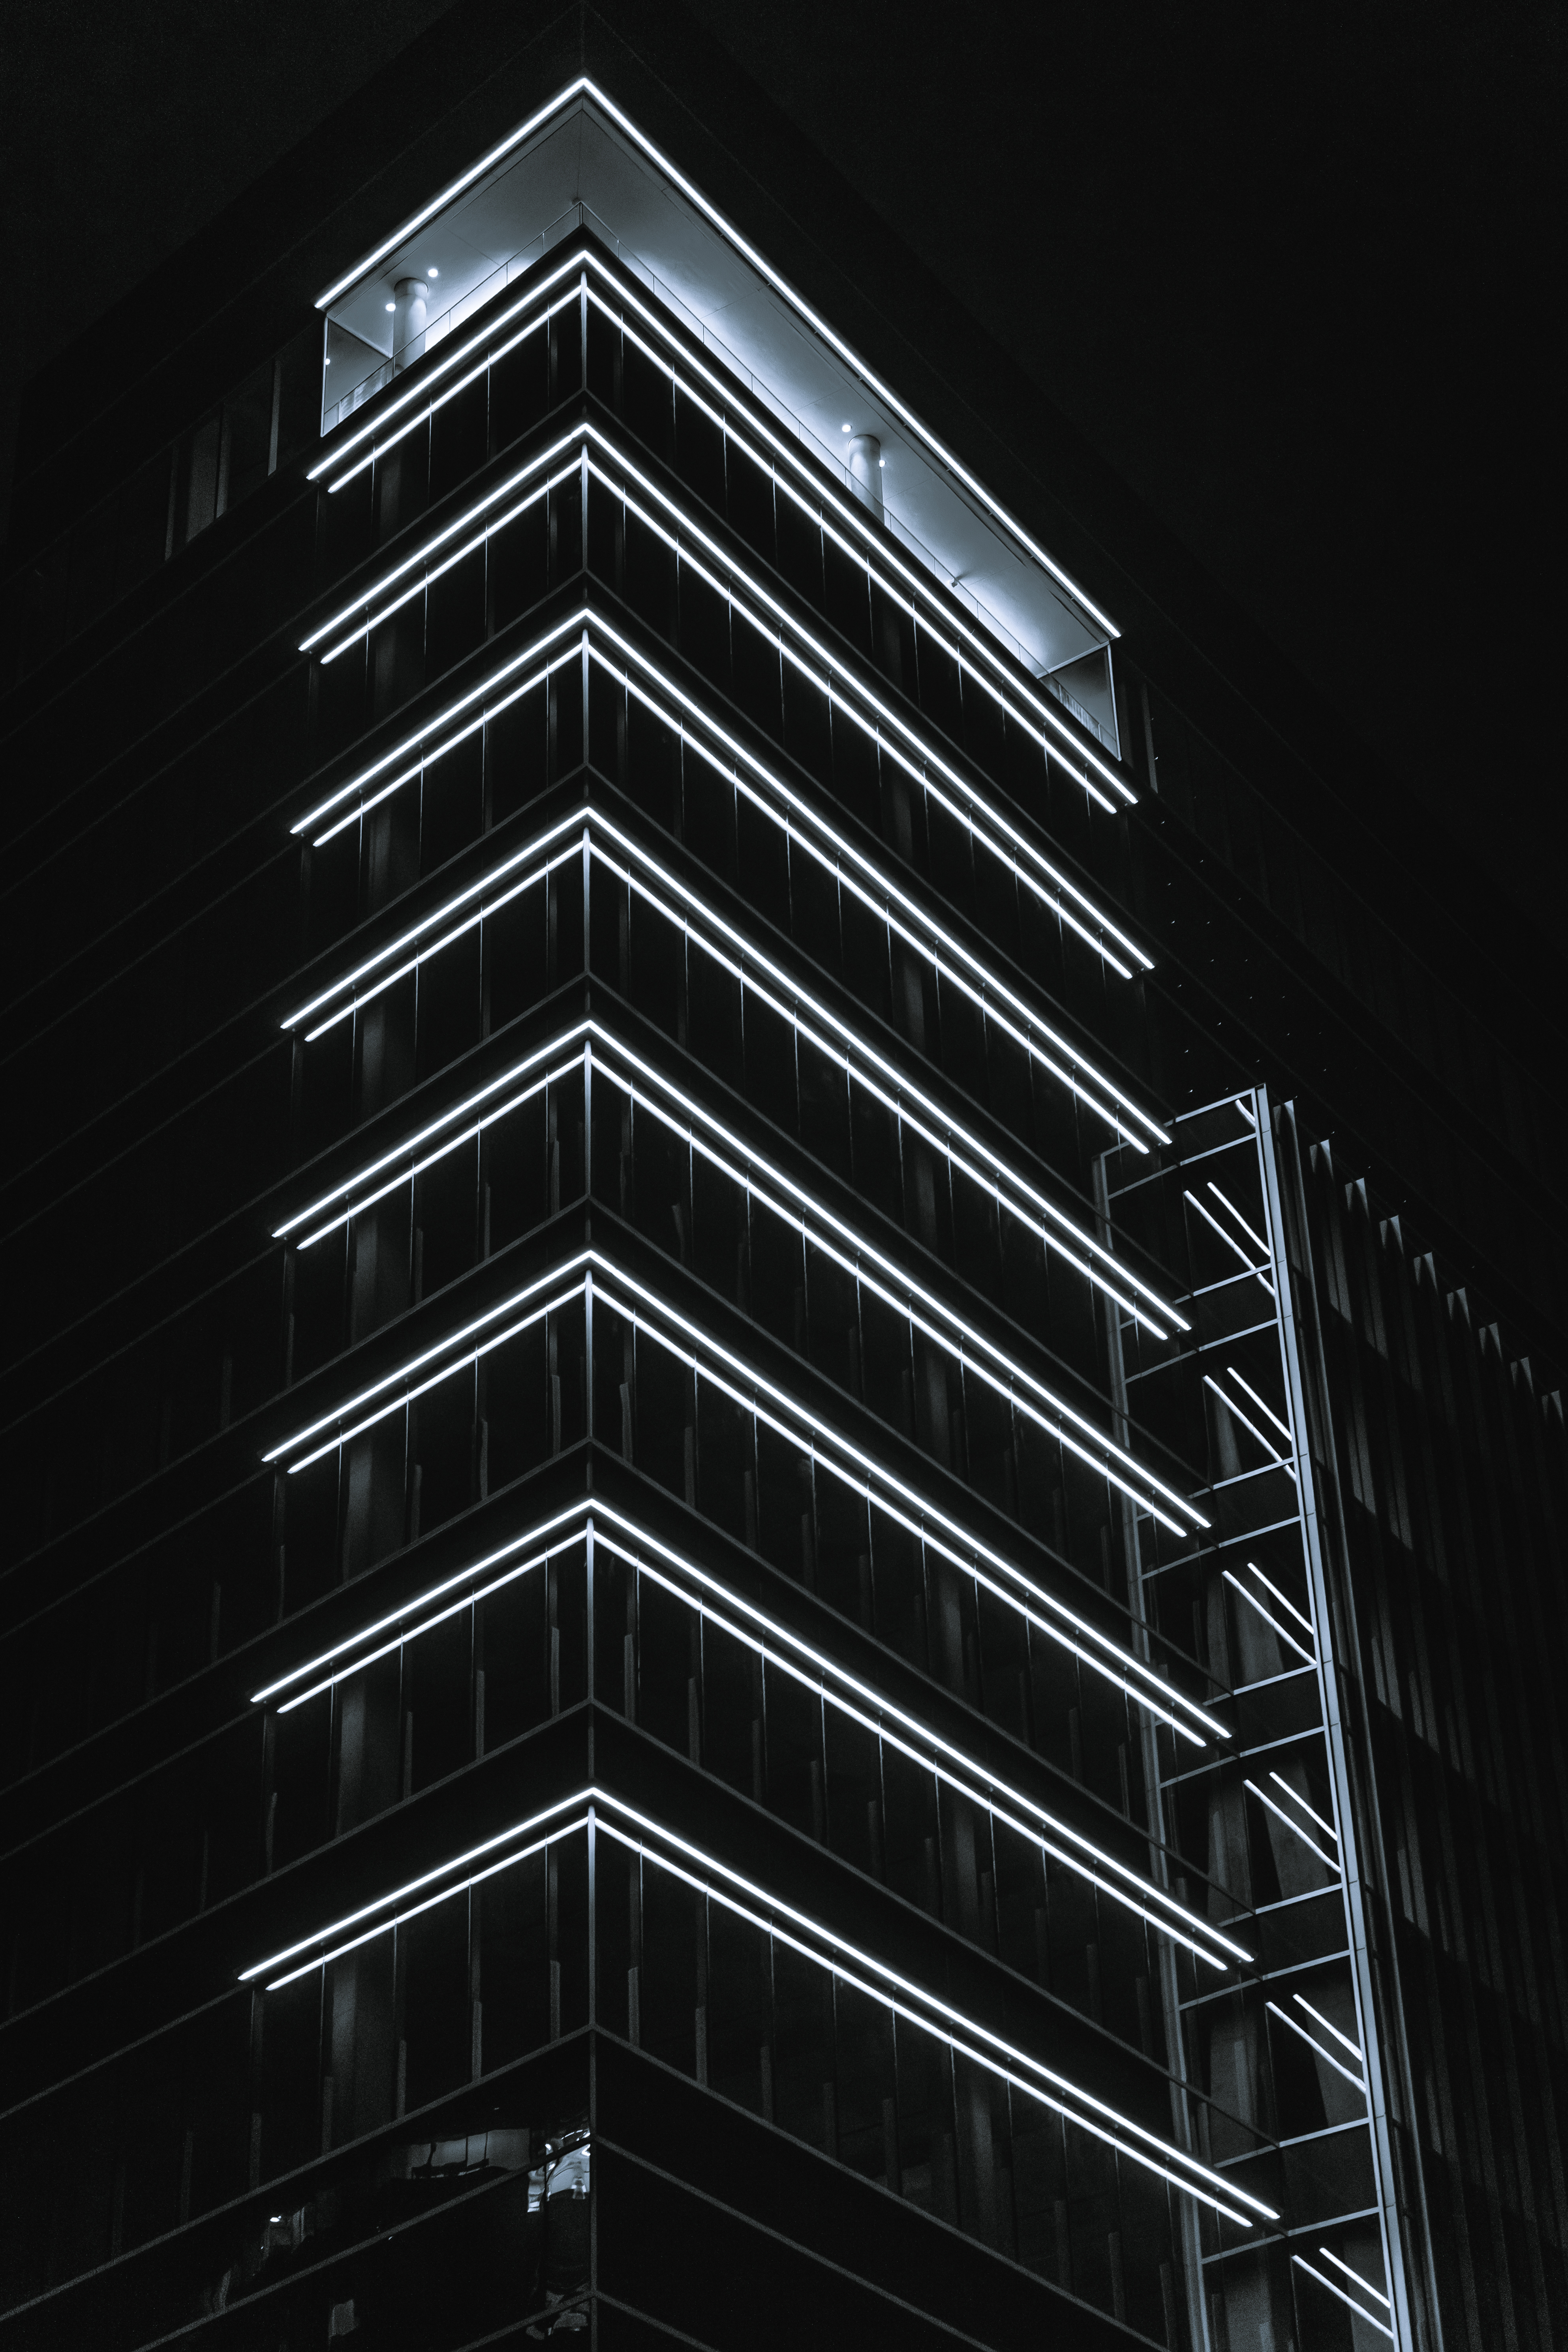 General 3971x5956 photography dark low-angle architecture building monochrome portrait display minimalism simple background